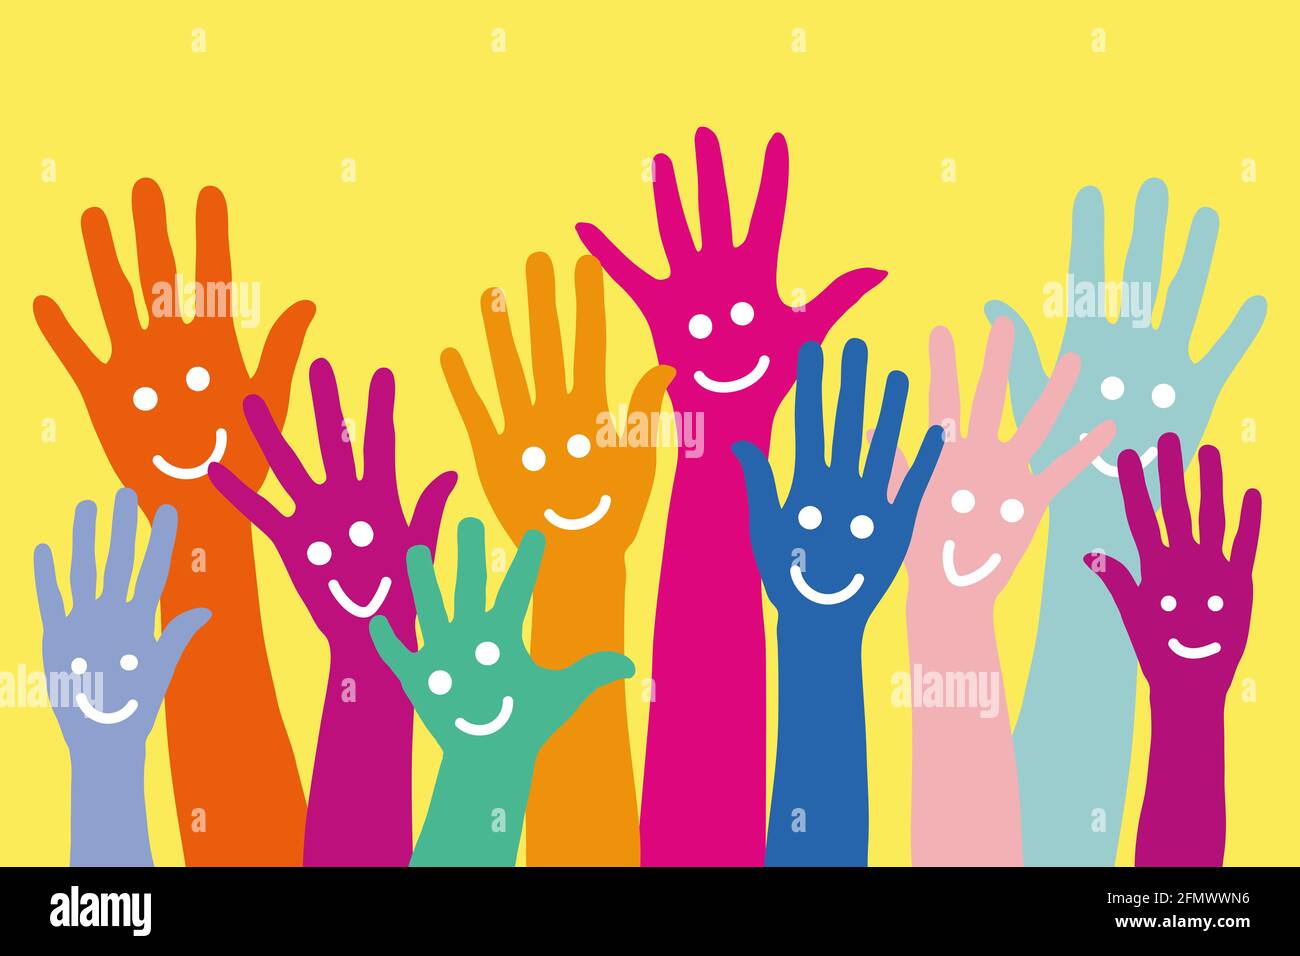 Many different colorful hands with smiley faces against a yellow background Stock Photo